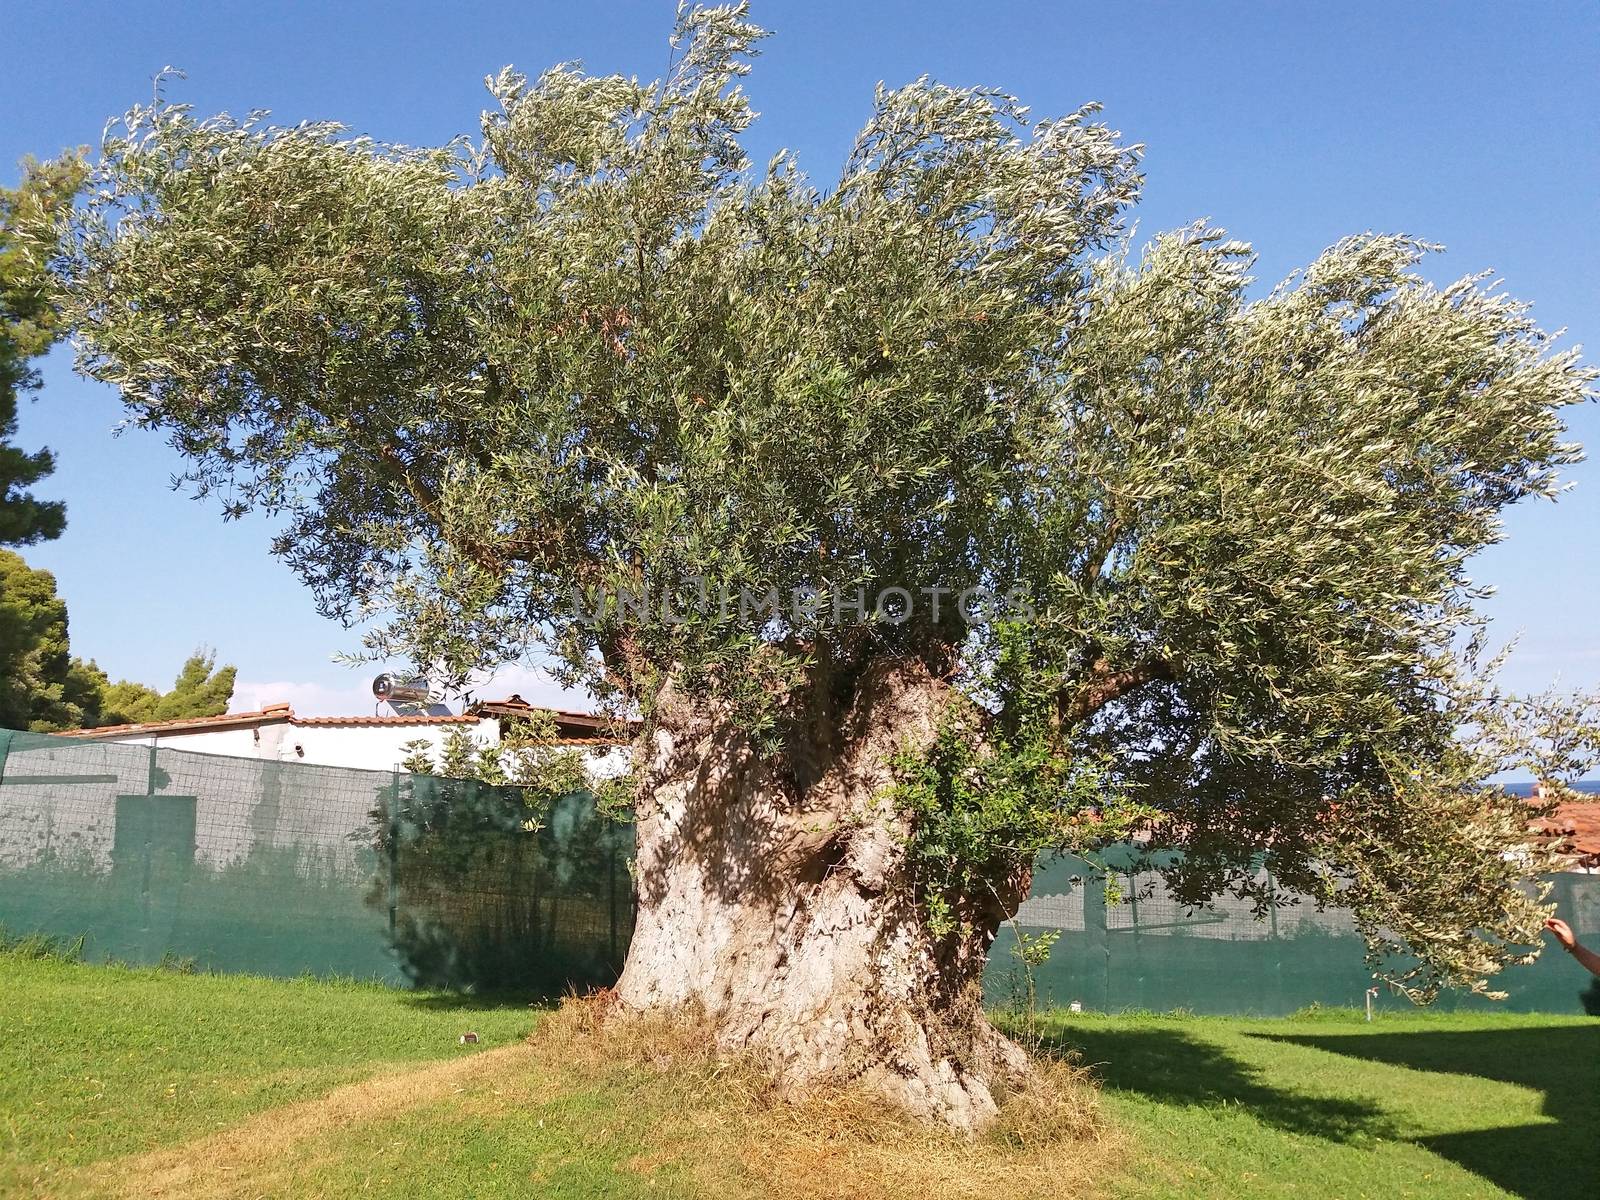 Very beautiful grows an old olive tree in Greece by Mindru